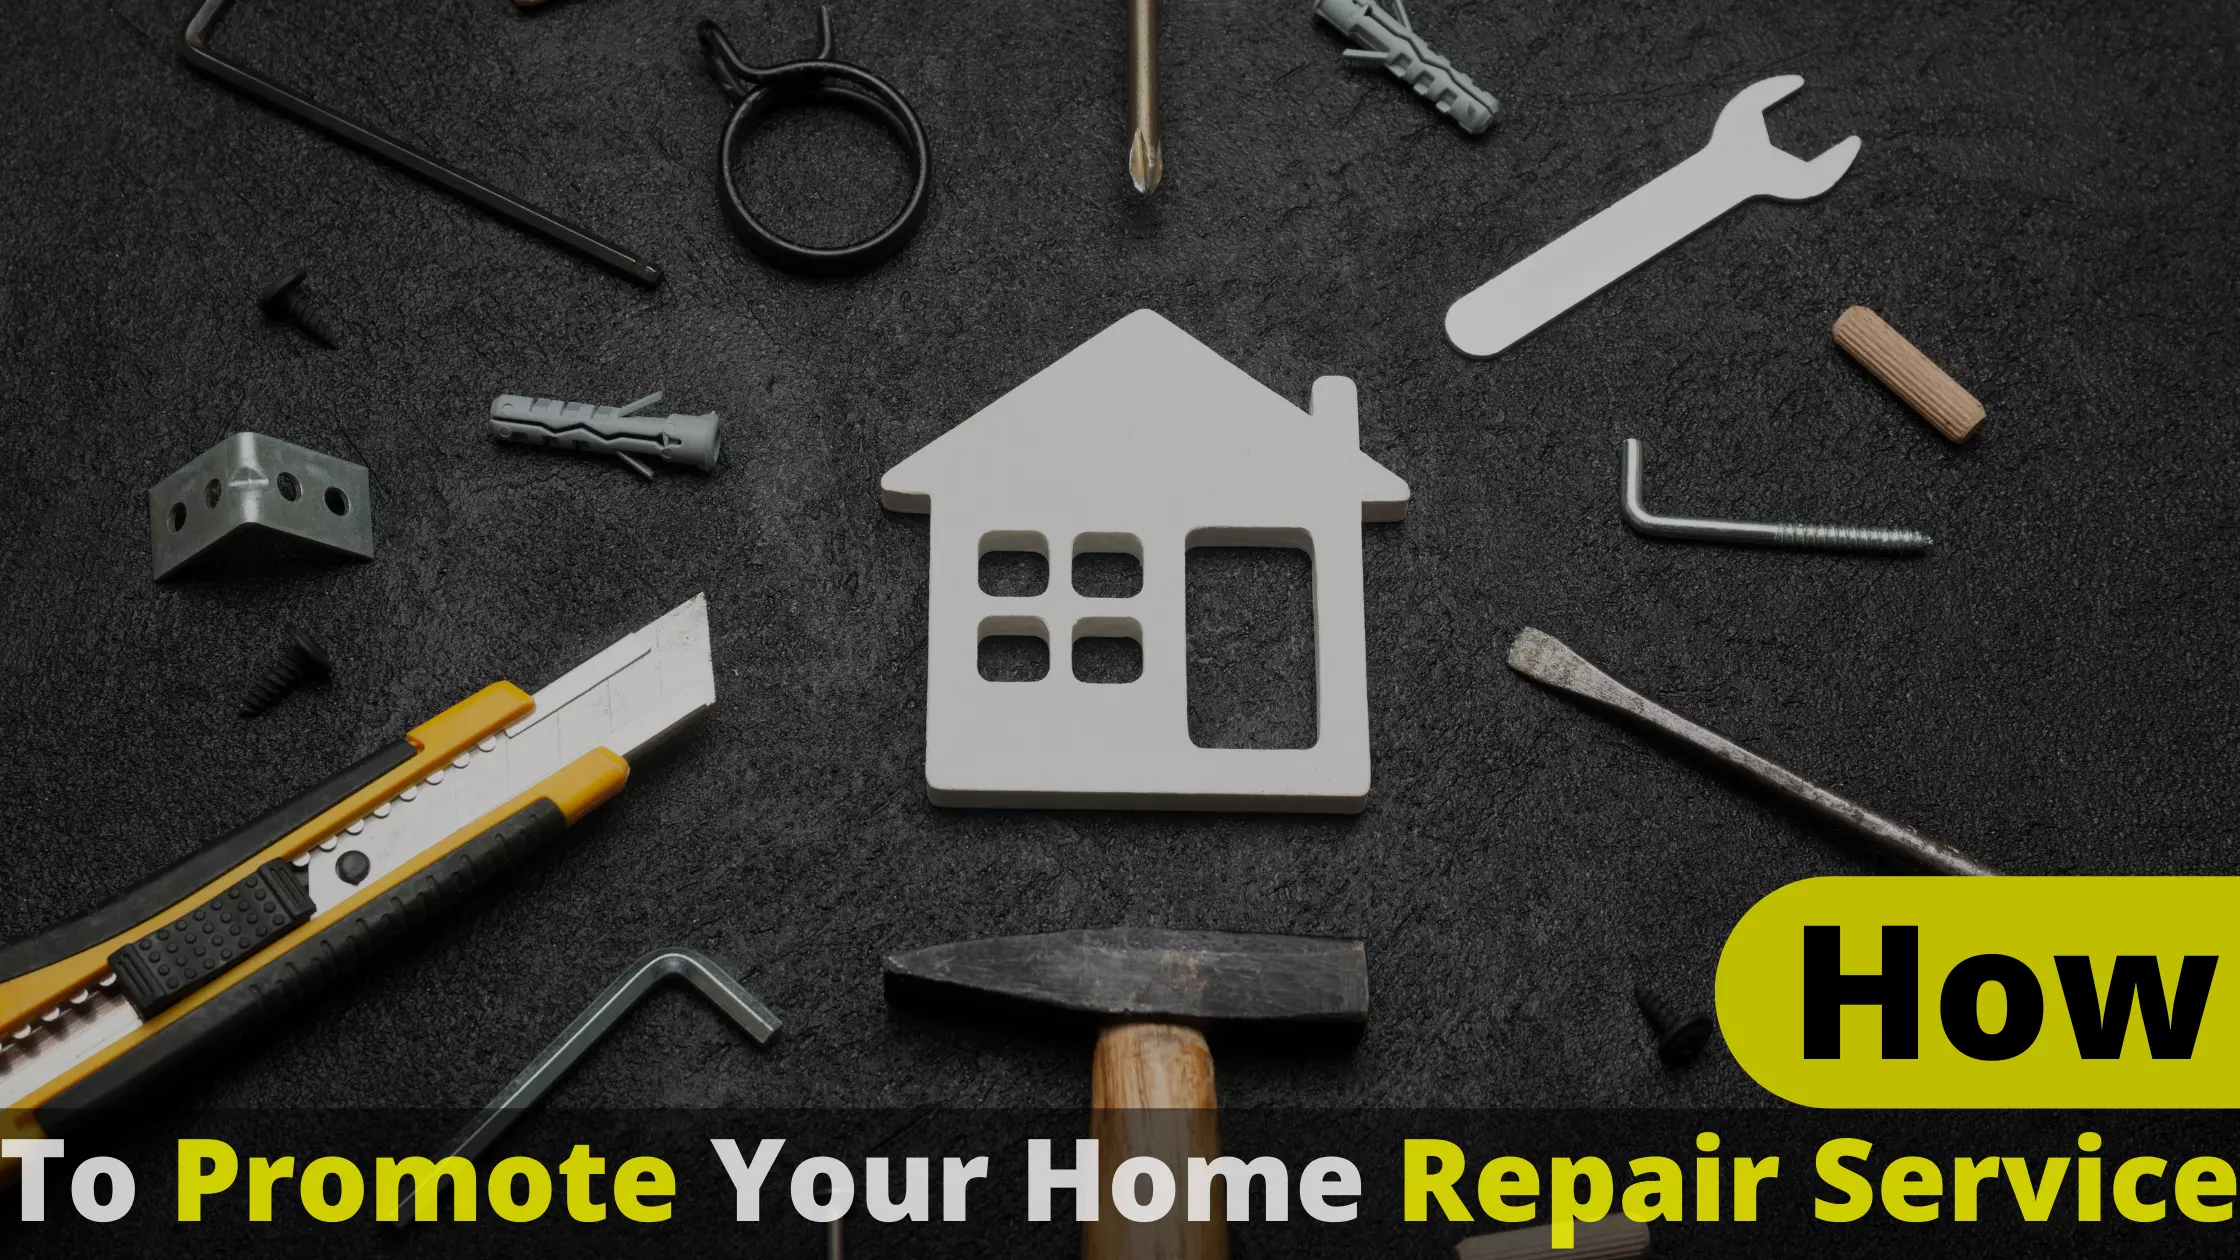 How to Promote your Home Repair Service - Top Notch Guide